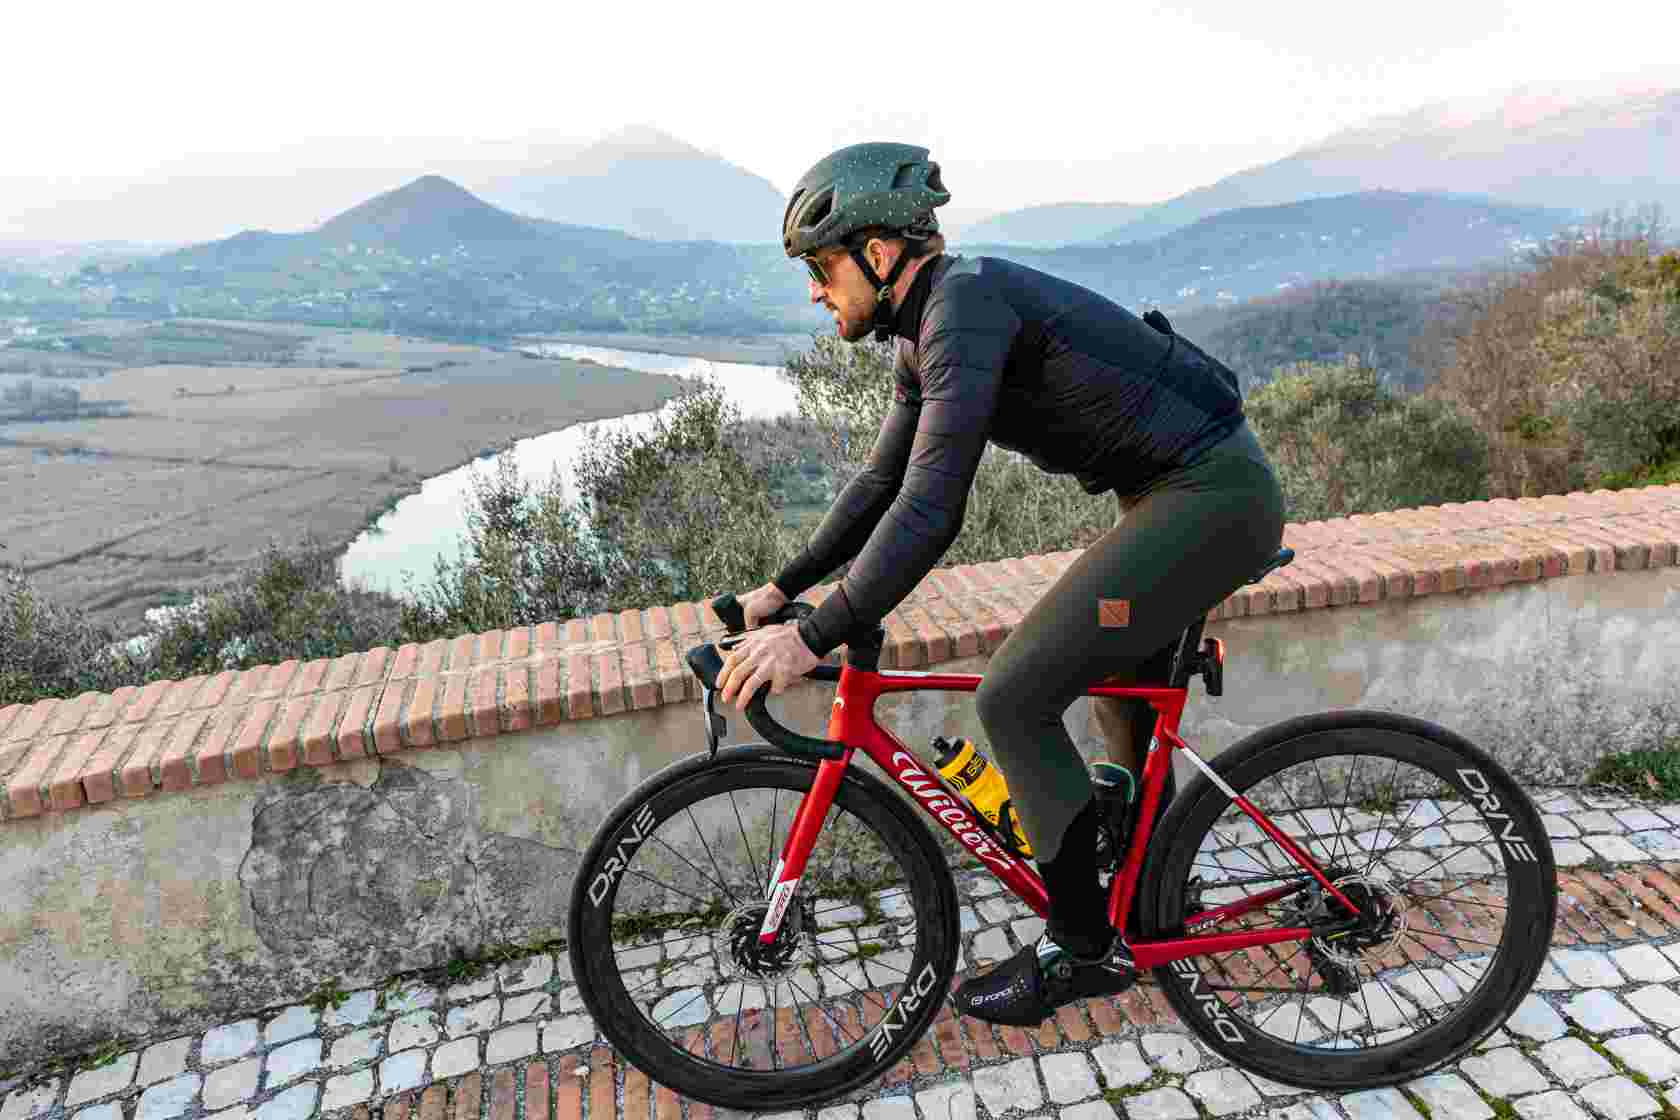 A Cyclist Riding a Wilier Road Bike With Elitewheels Drive 50 in Italy